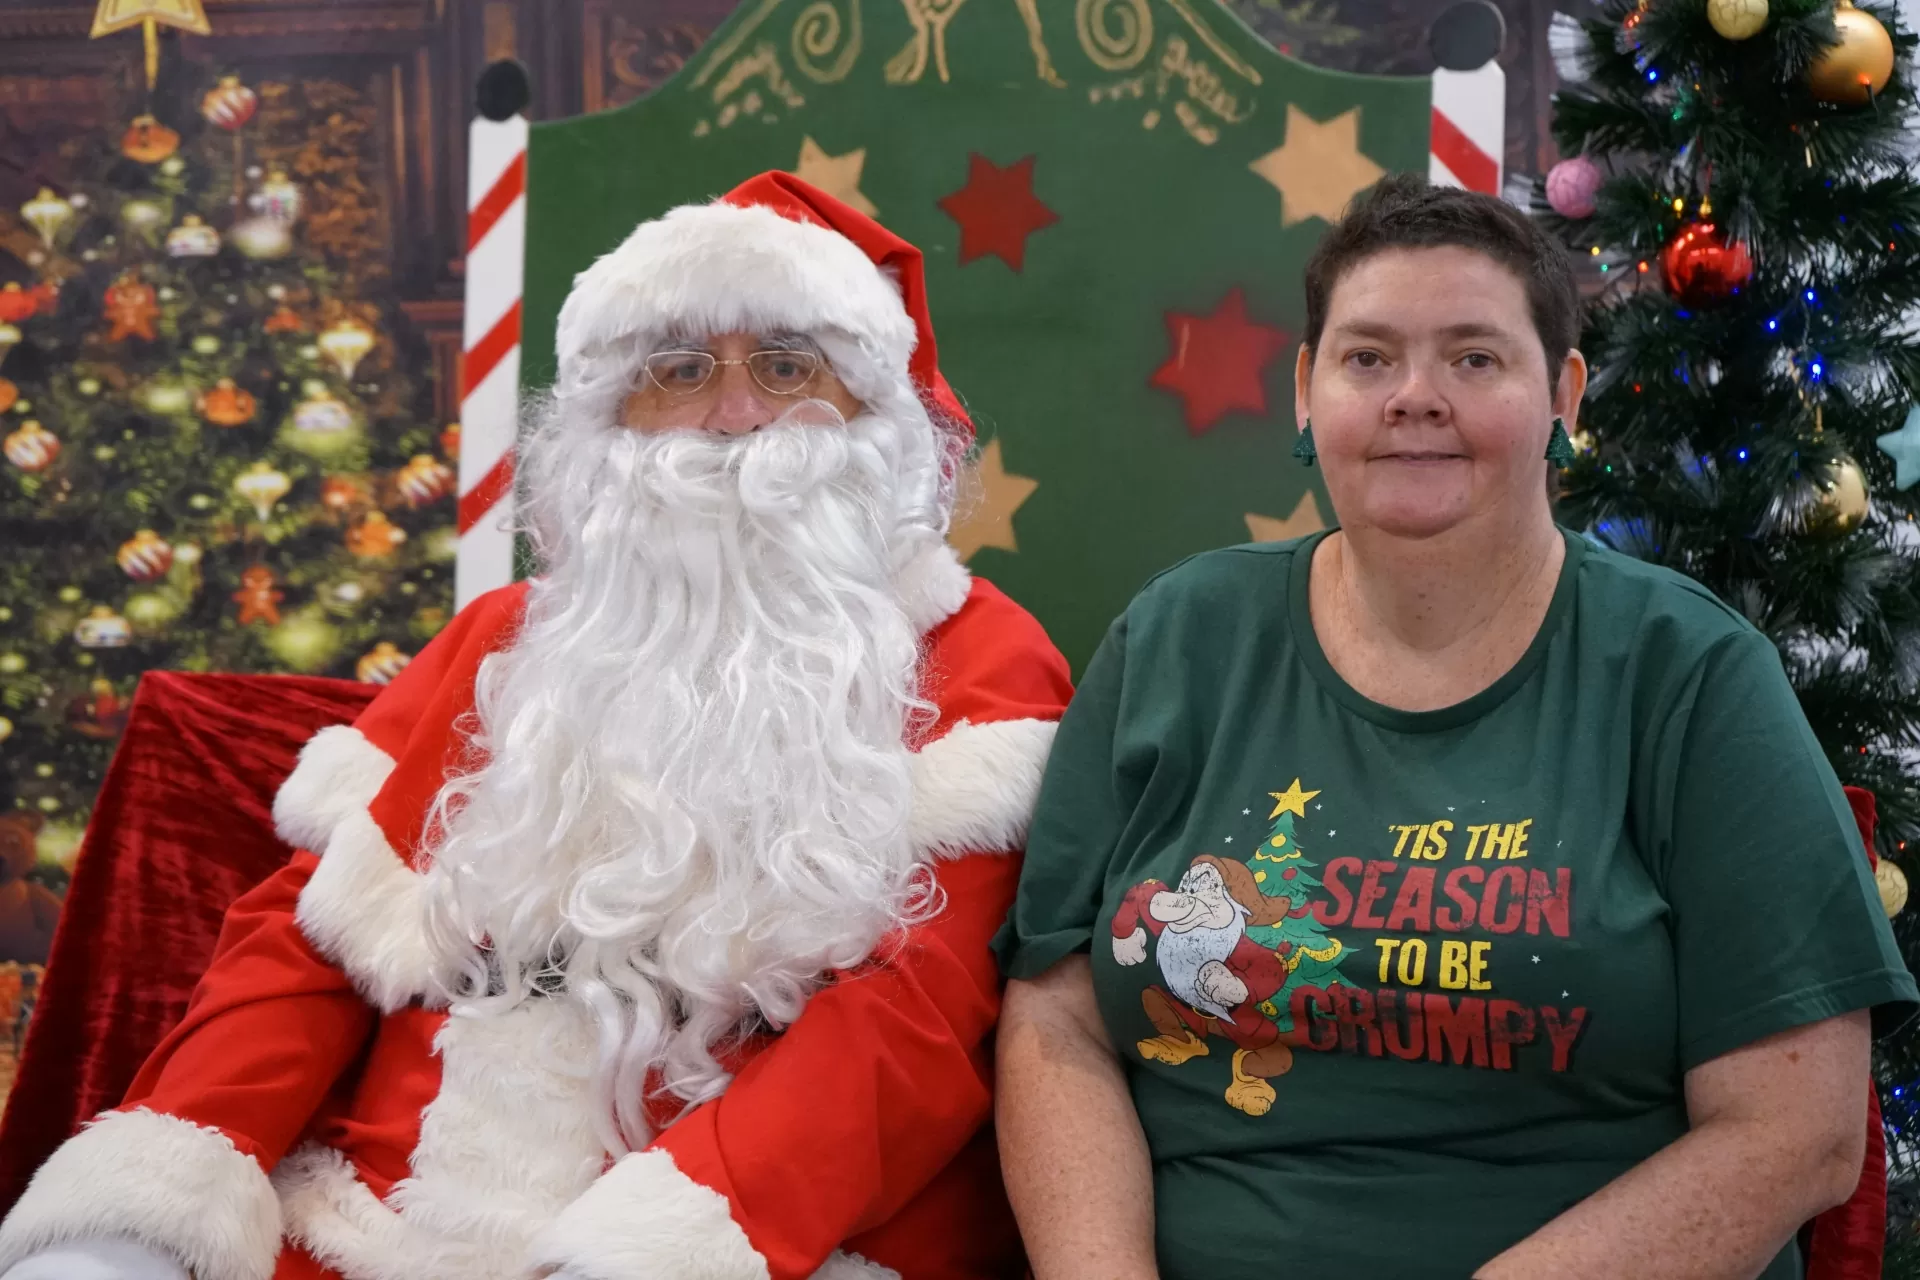 A woman in a green shirt sits on Santa's right